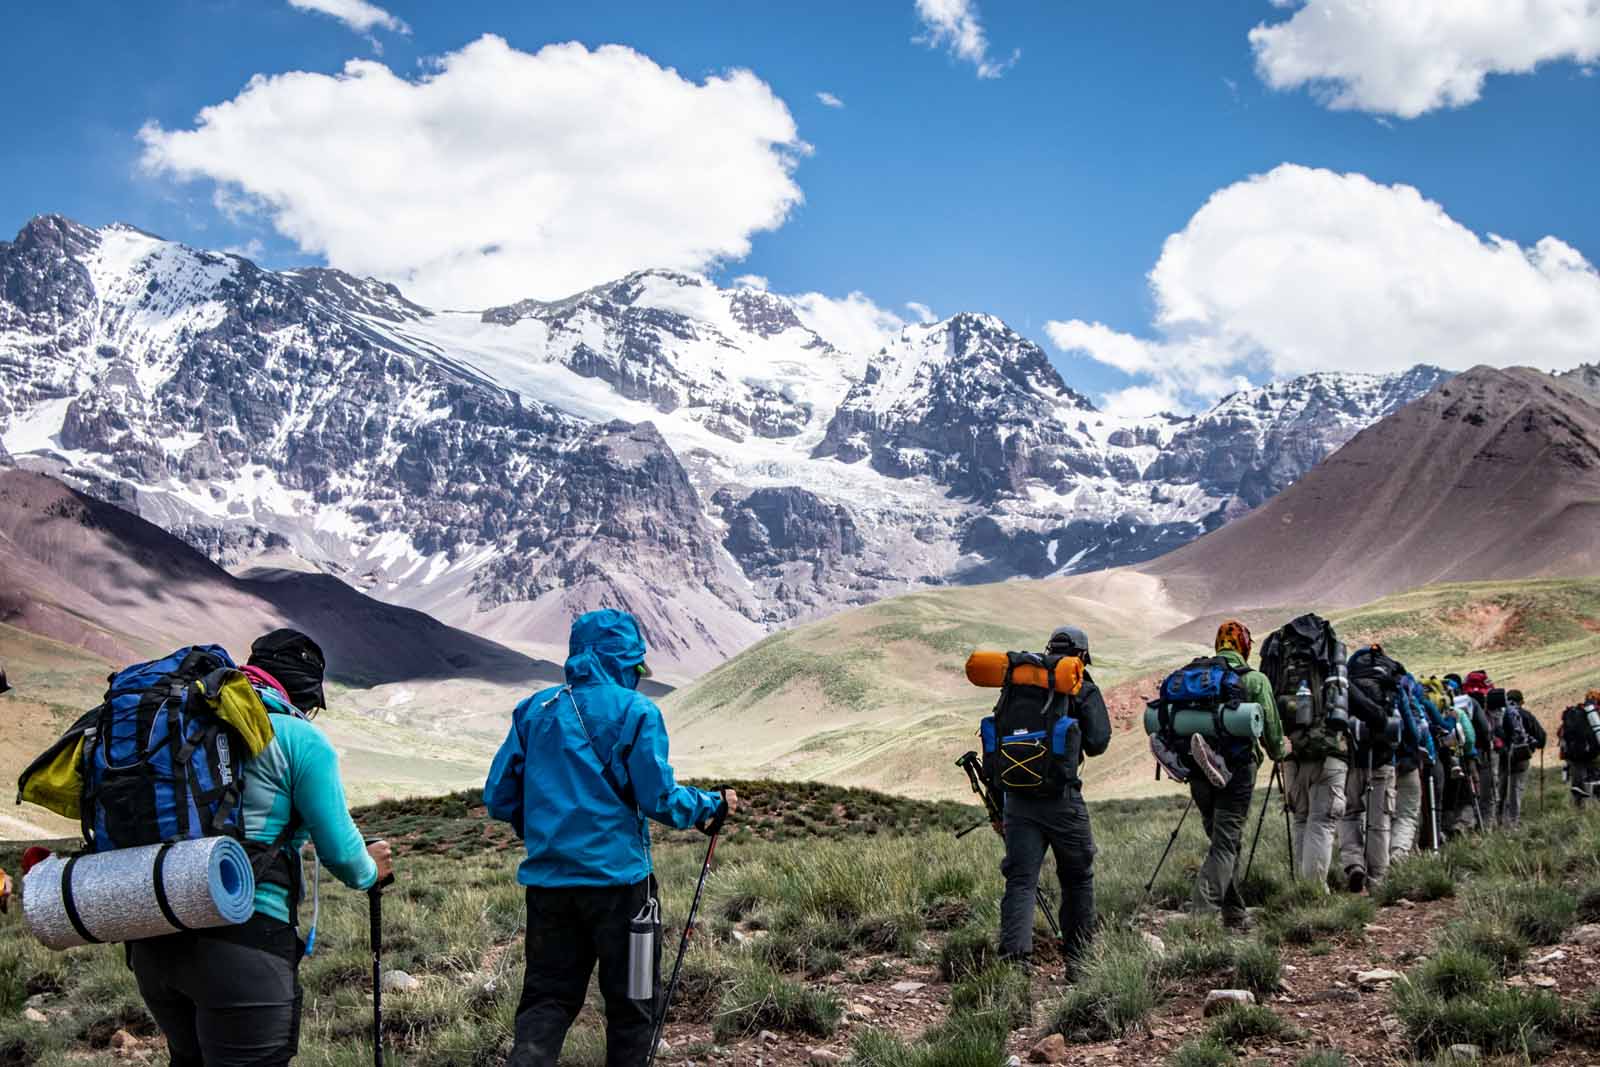 A group of trekkers in Argentina's Andes Mountains